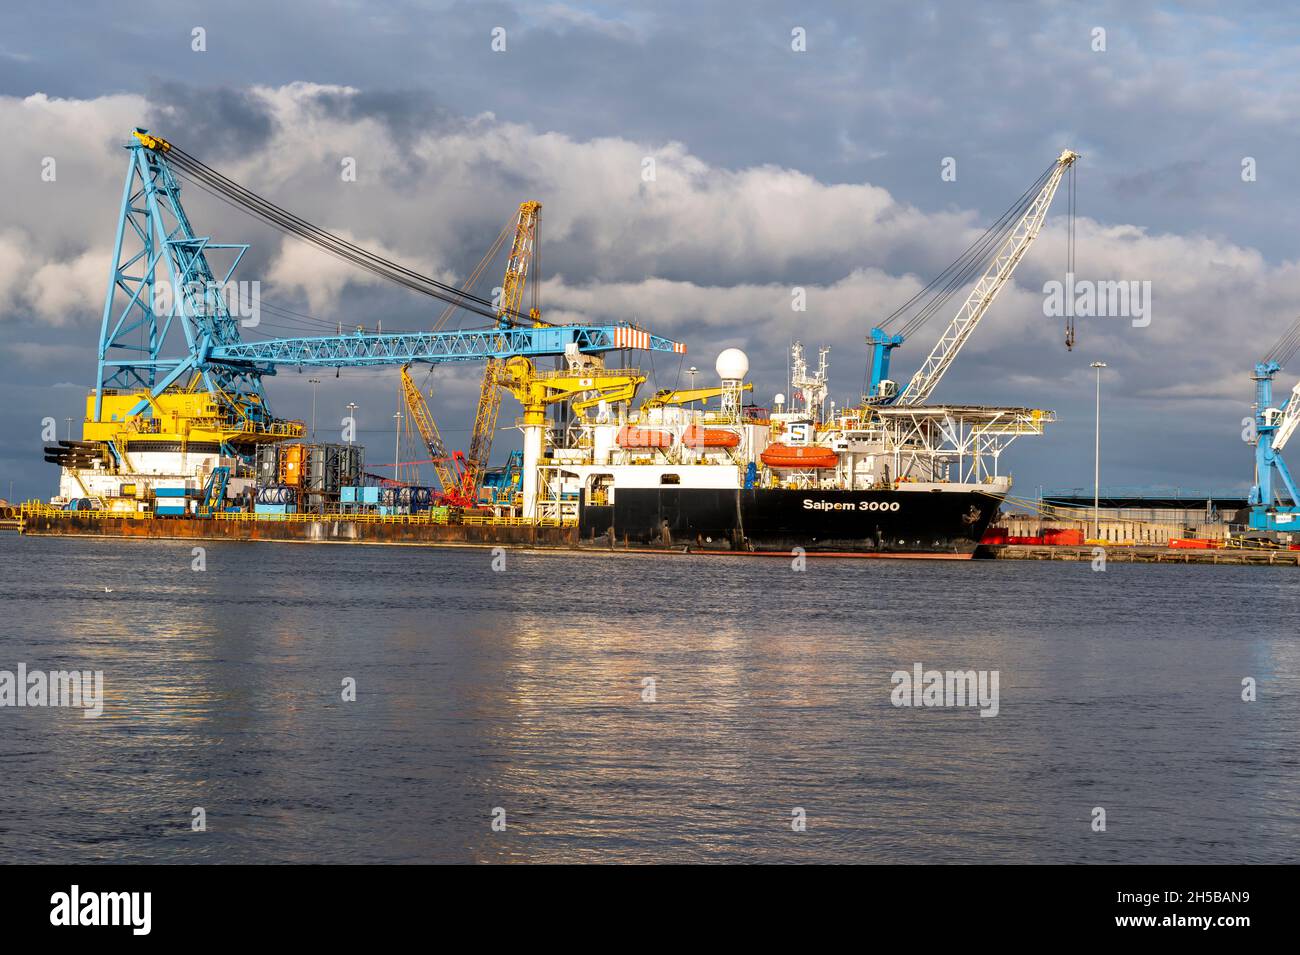 Saipem 3000 docked at Battleshisft Wharf Blyth is a large heavy lift vessel with a very large crane on board Stock Photo